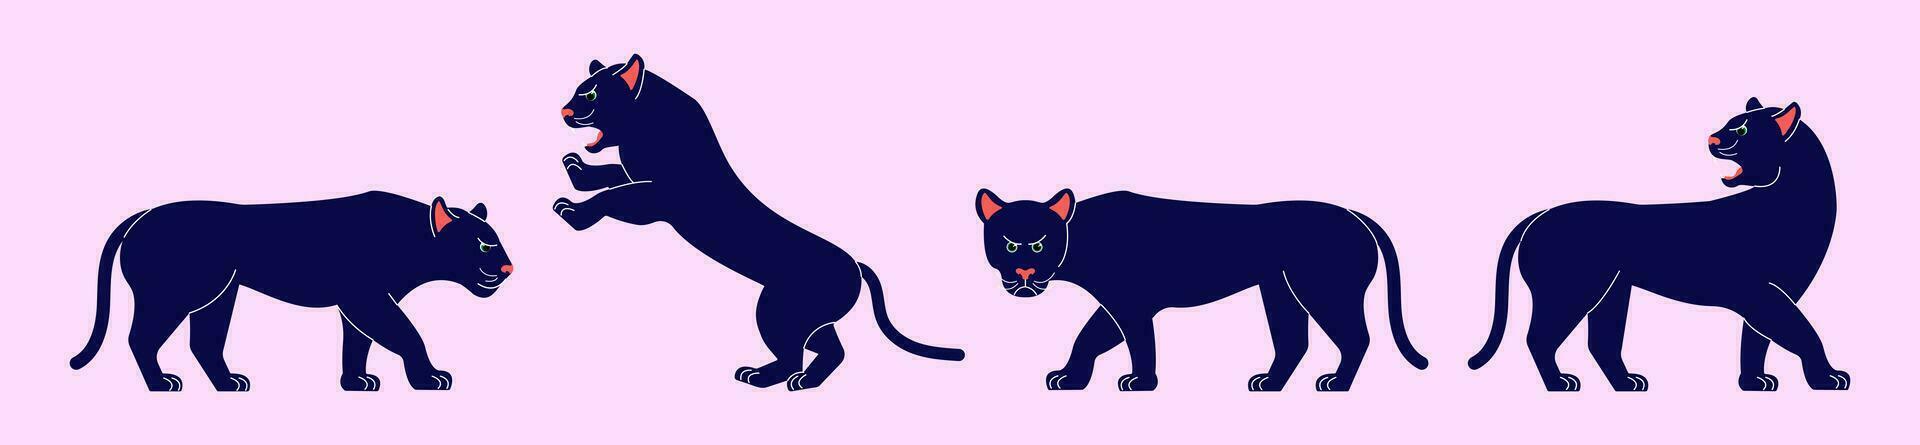 Panthers in different poses. Vector illustration of panthers in flat style. Minimalism.